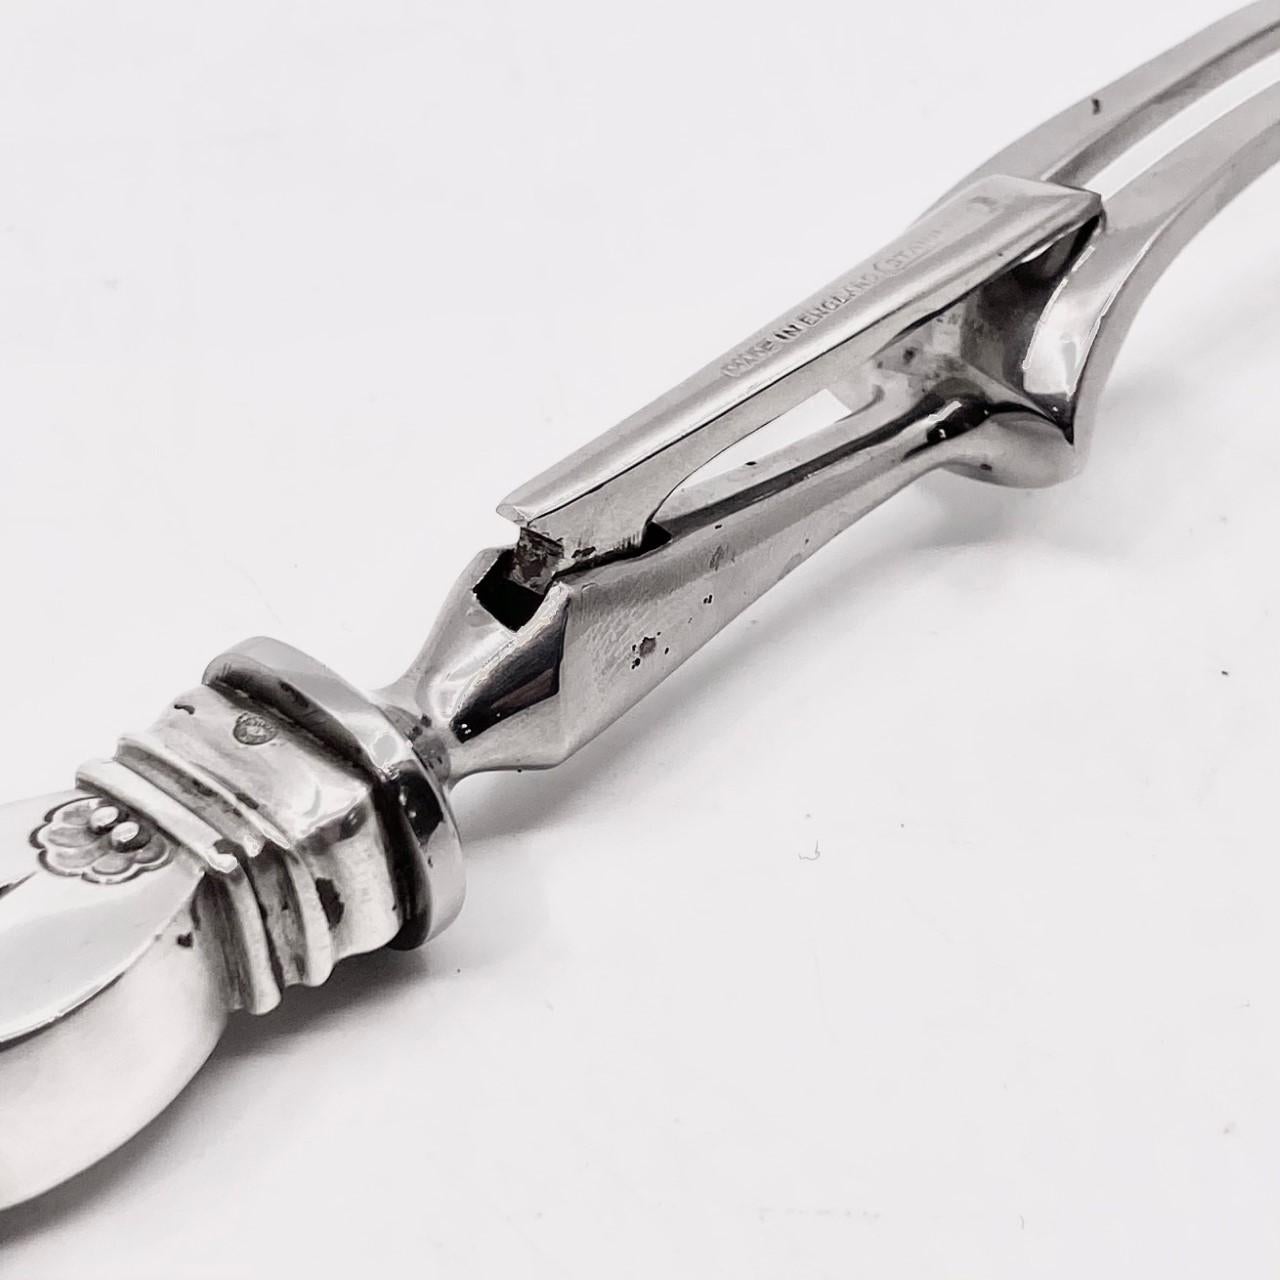 A Georg Jensen carving fork with sterling silver handle and stainless steel fork, item #543 in the Cactus pattern, design #30 from 1930 by Gundorph Albertus.

Additional Information:
Material: Sterling Silver
Style: Art Deco
Hallmarks: With Georg